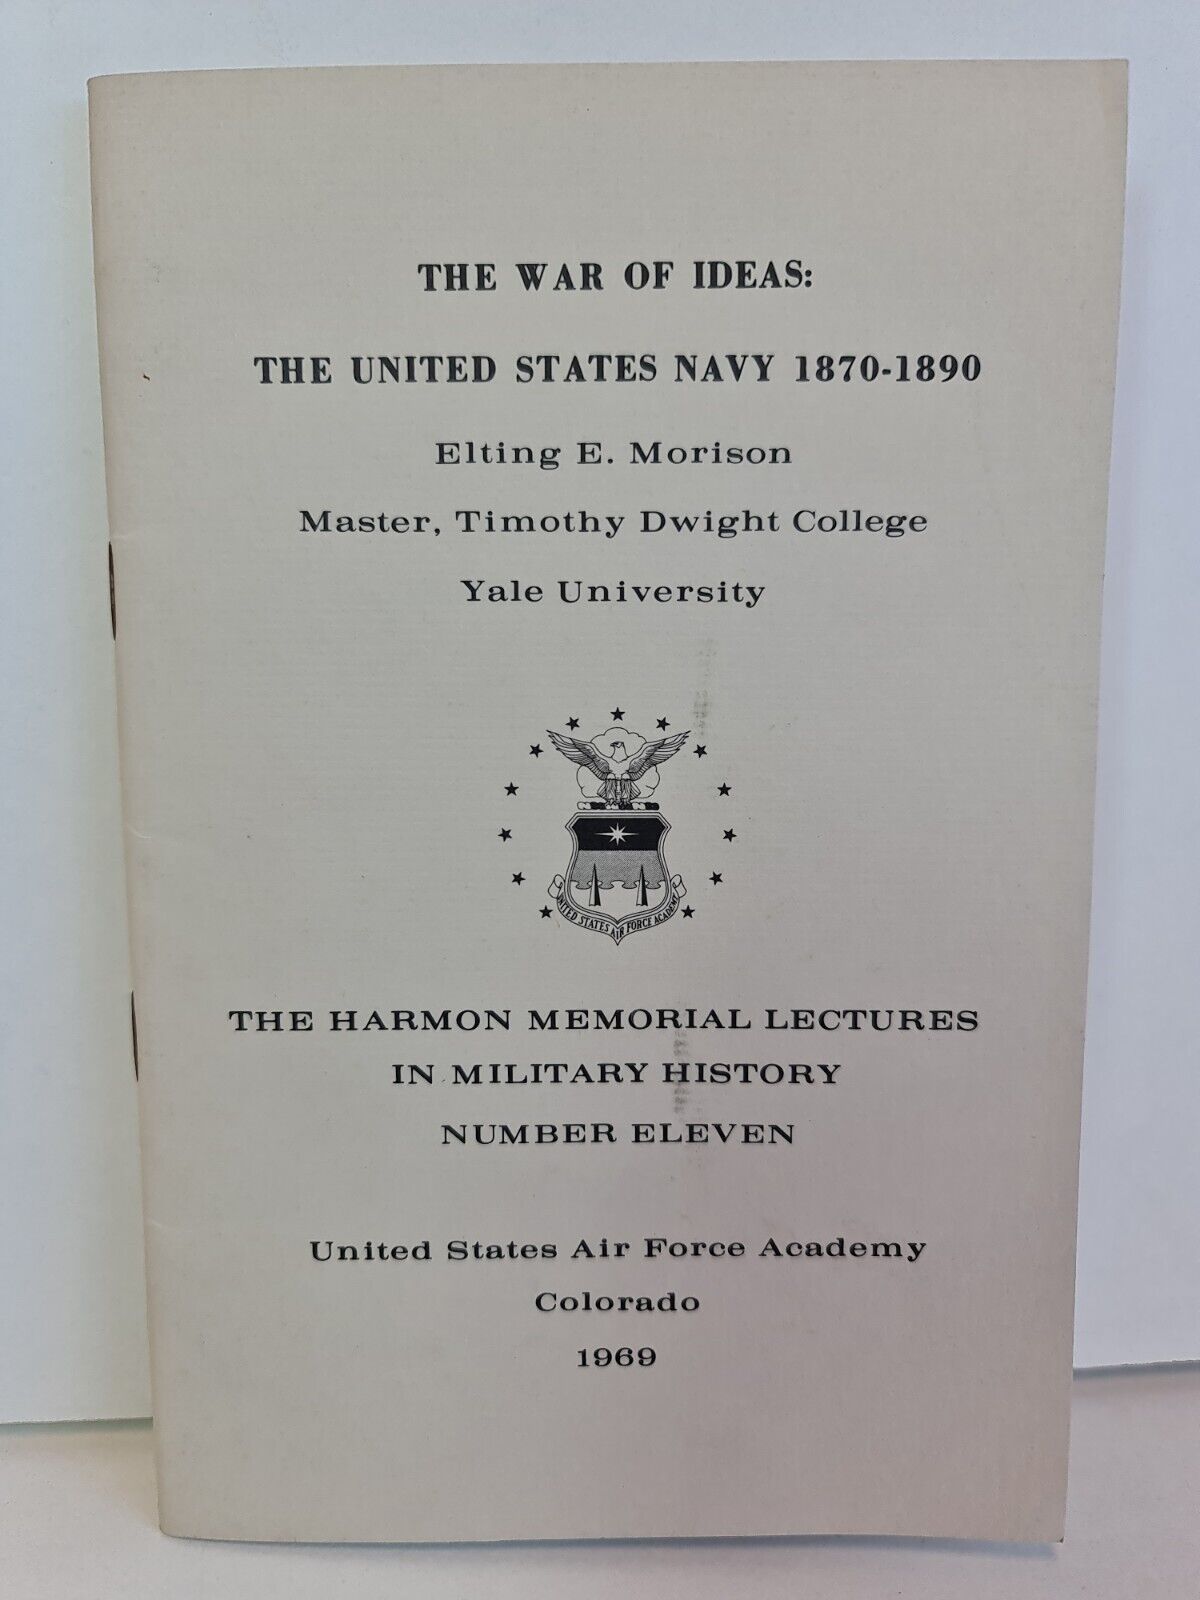 The War of Ideas: The United States Navy 1870-1890 by Elting Morison (1969)